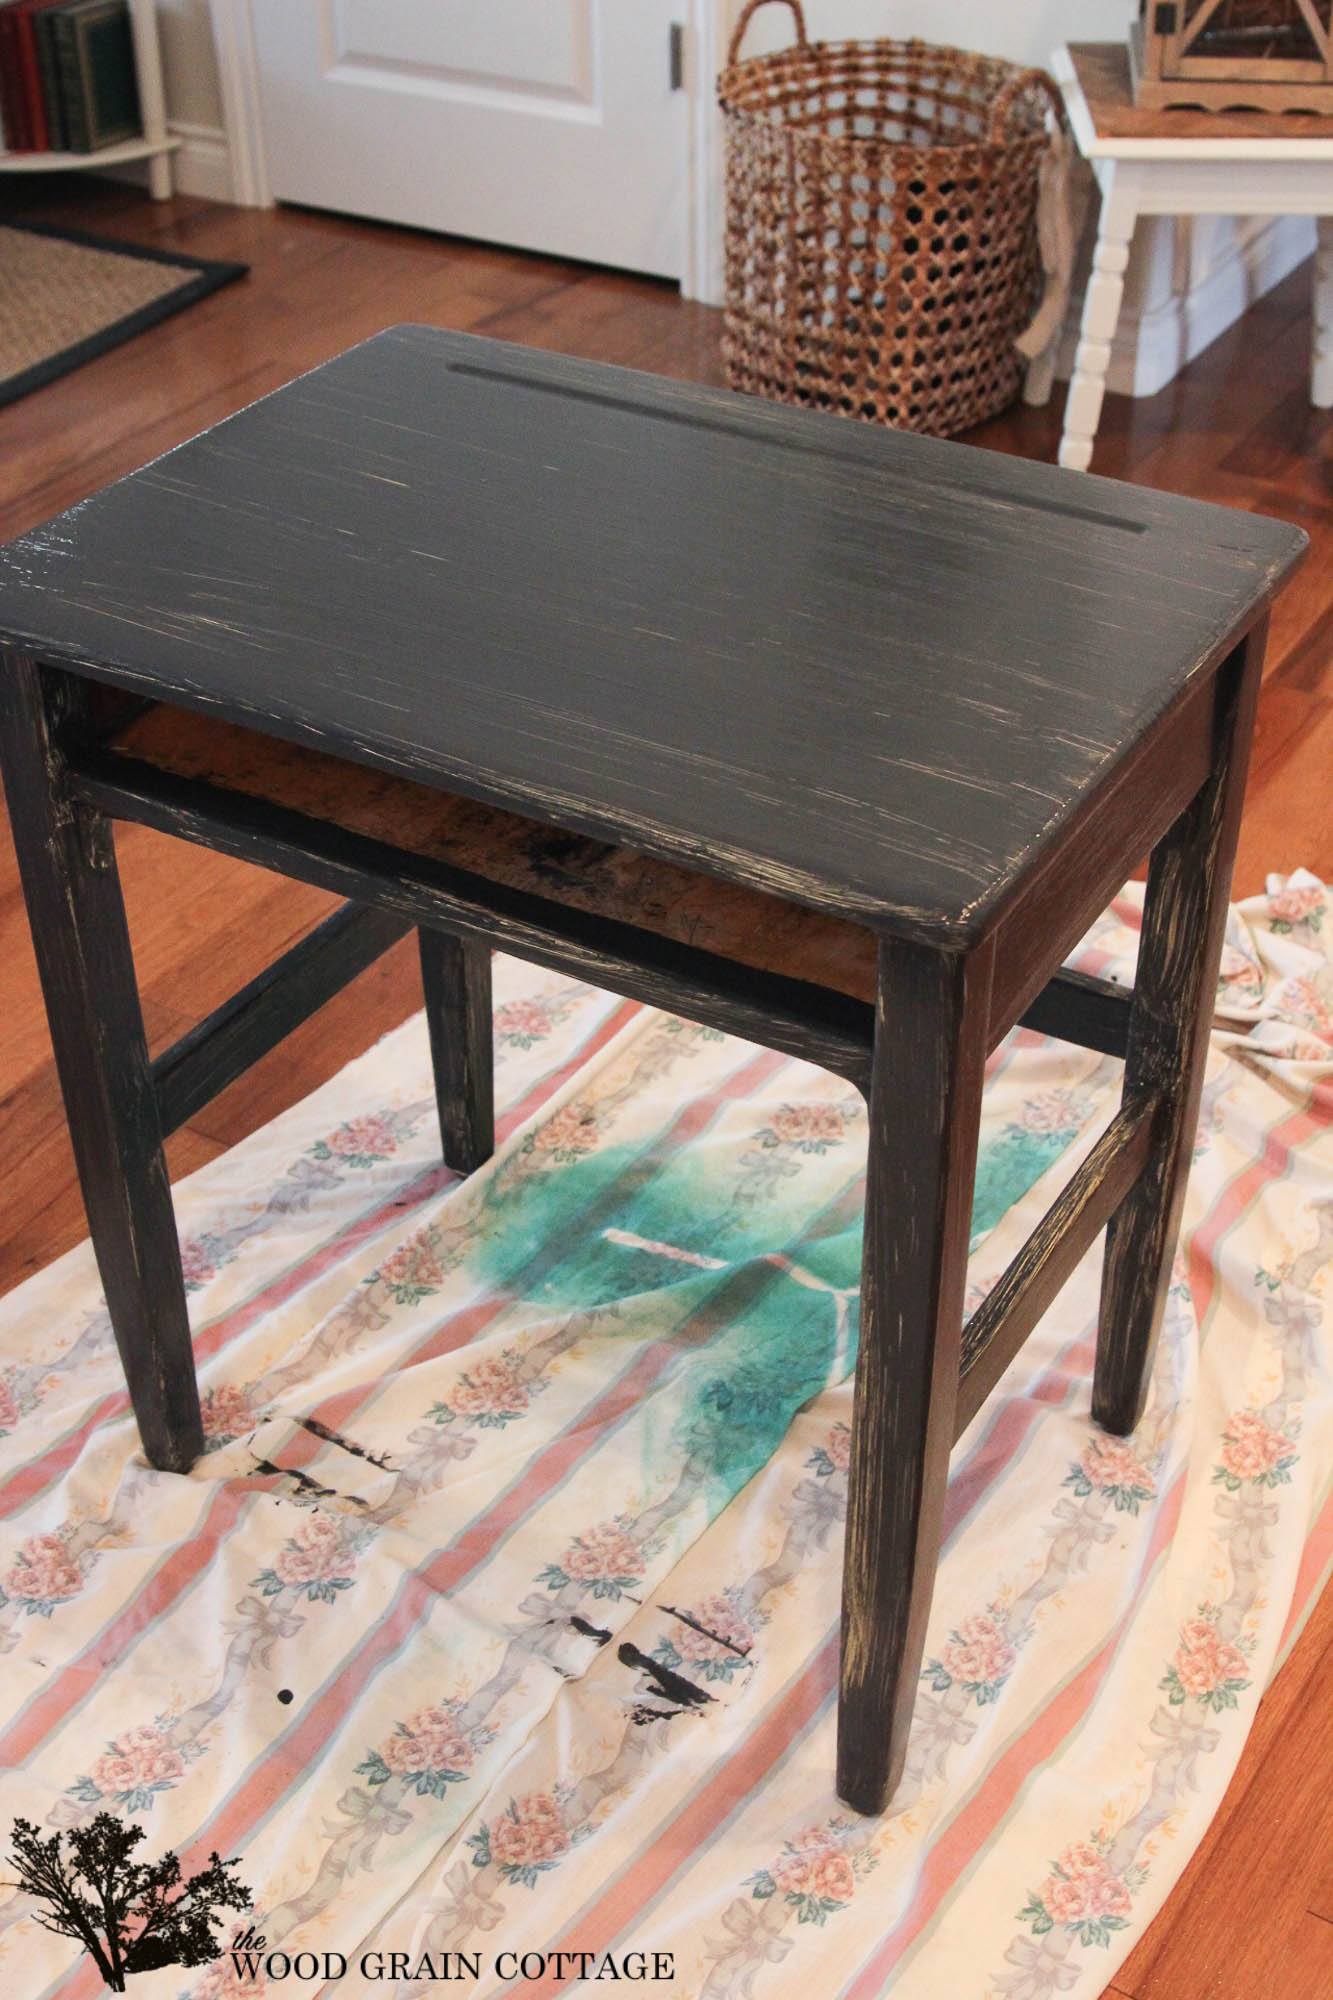 Child's Desk Makeover by The Wood Grain Cottage